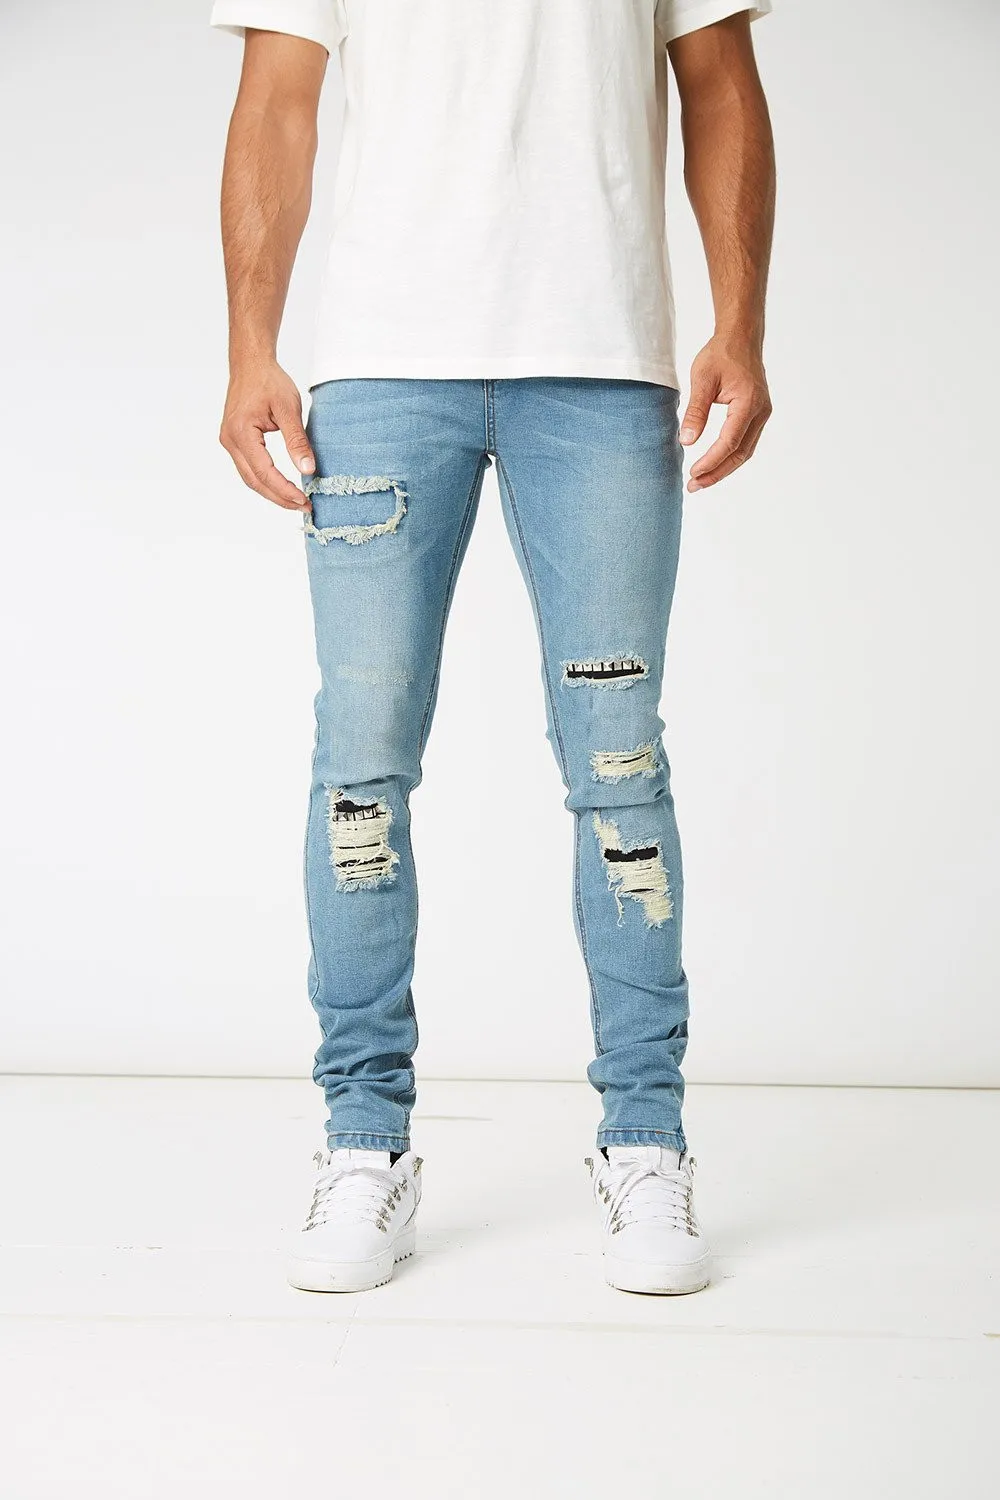 jeans new look 2019